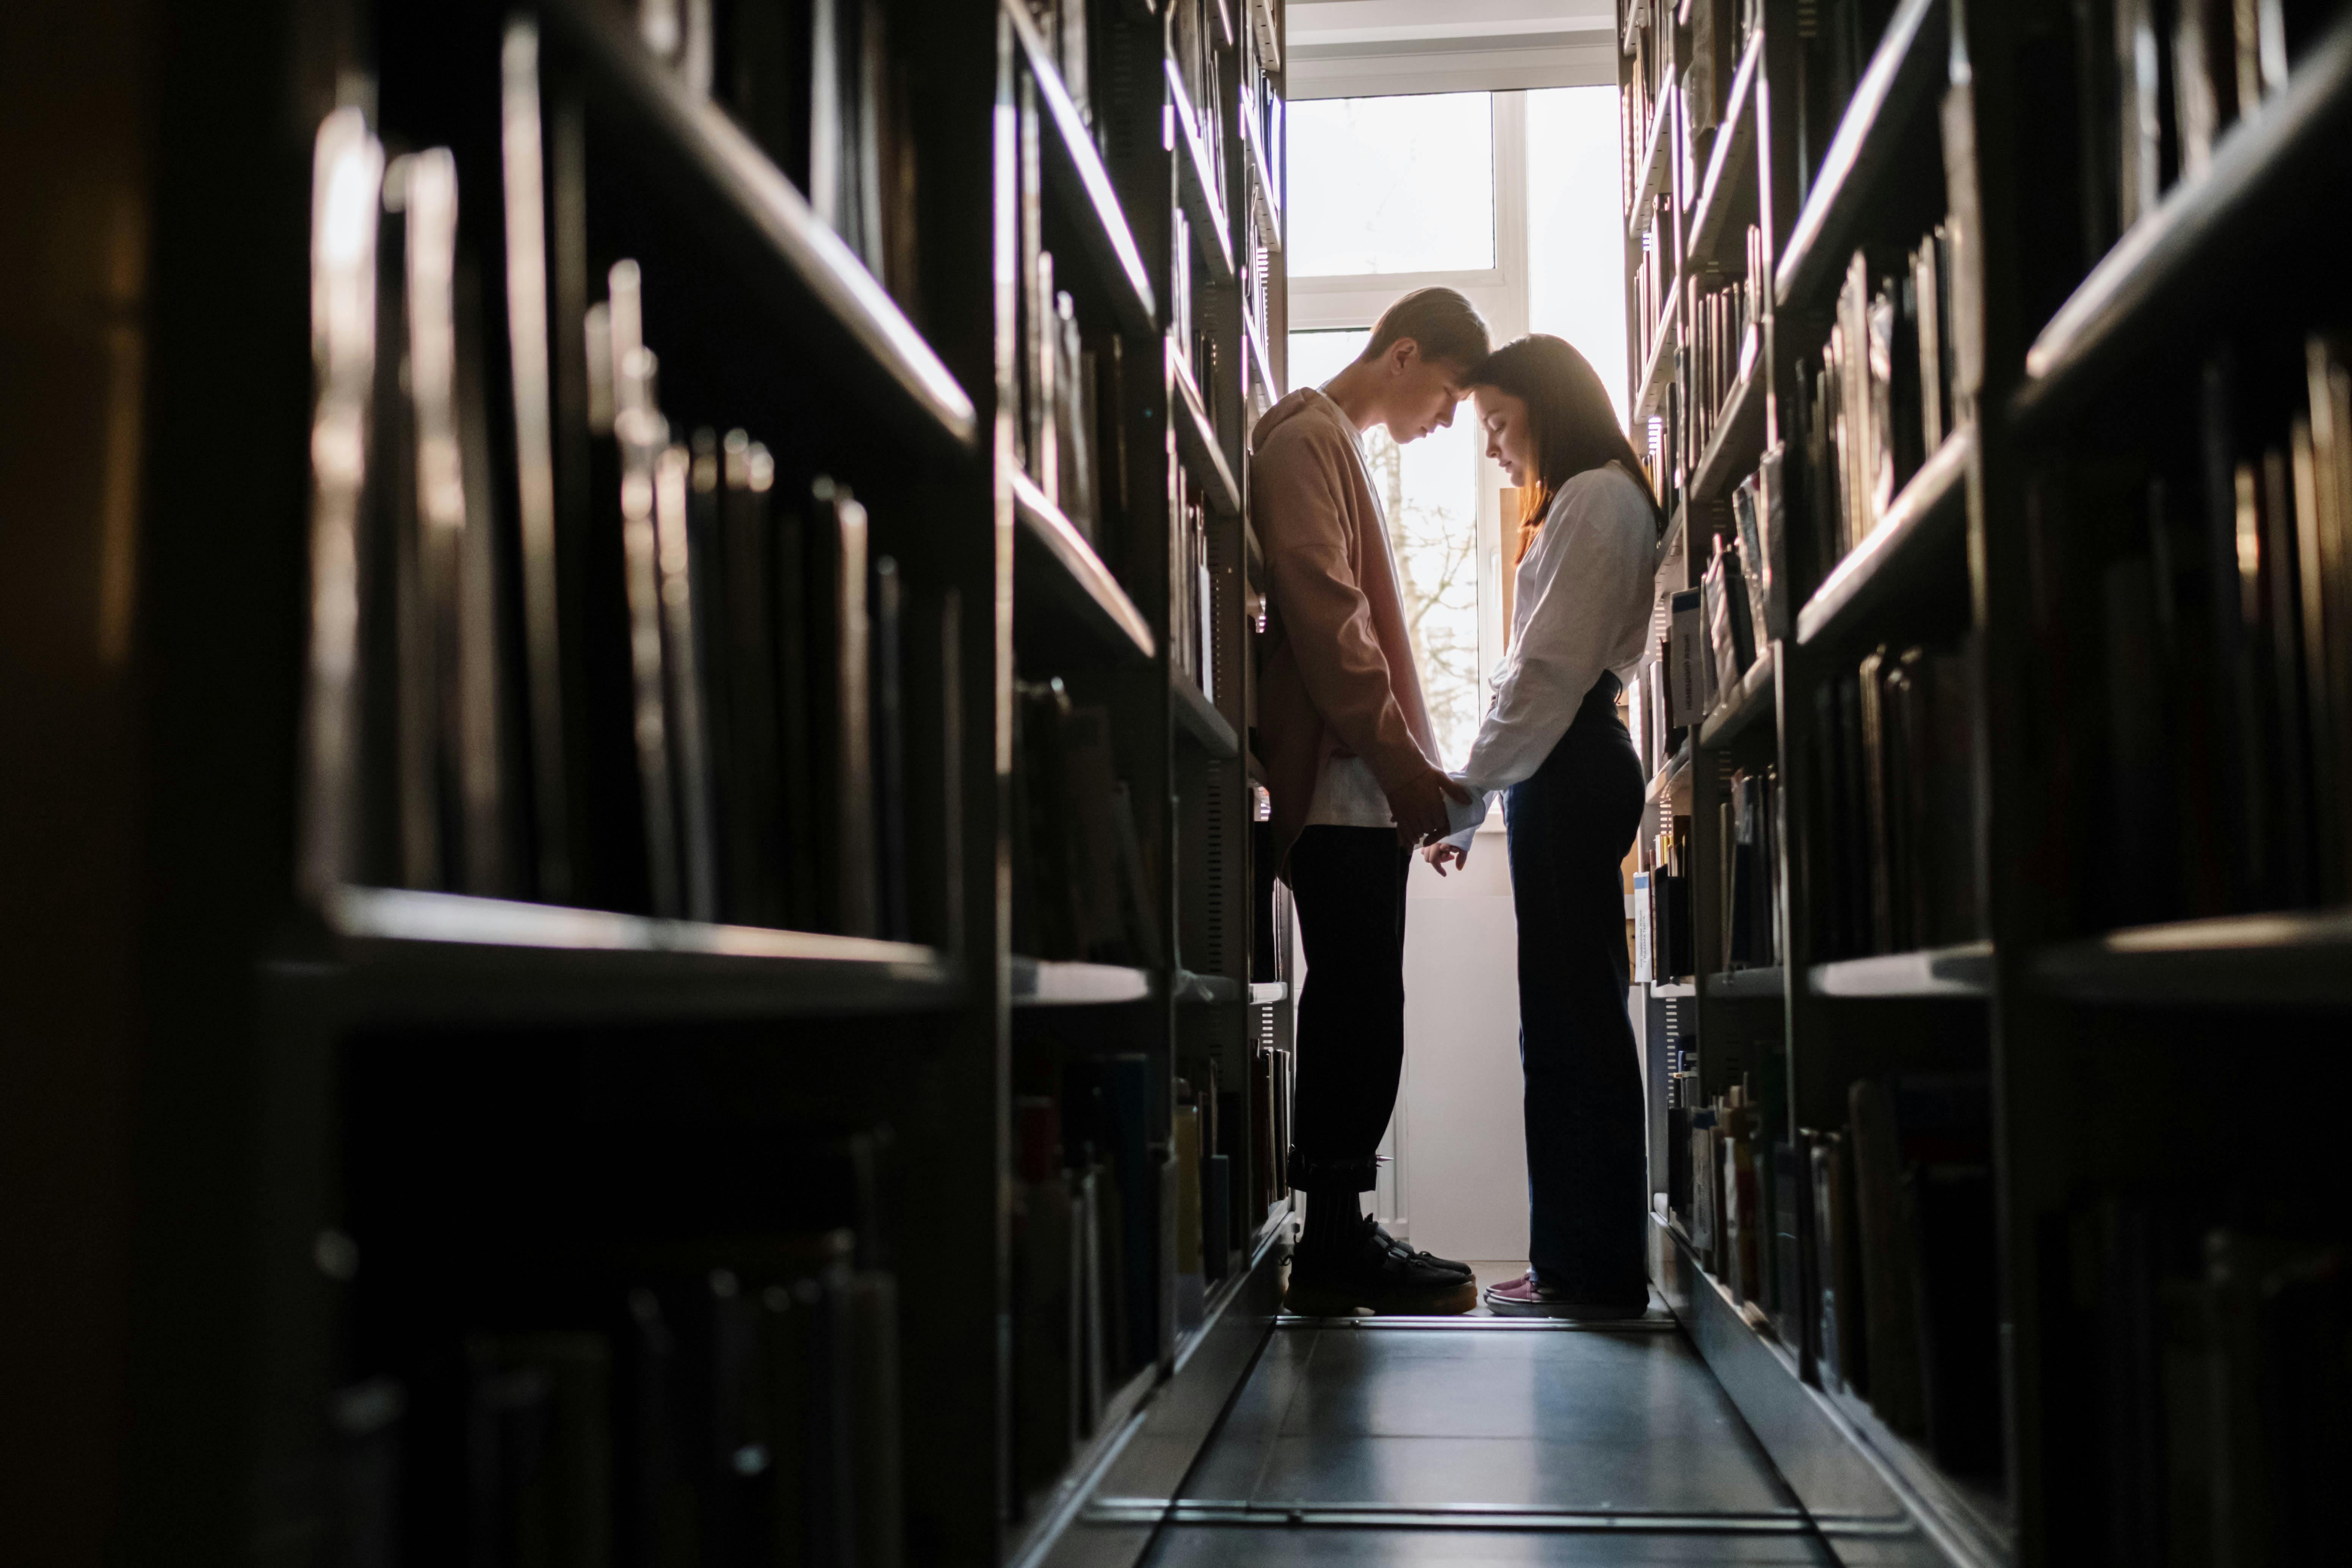 A couple meeting at a library | Source: Pexels